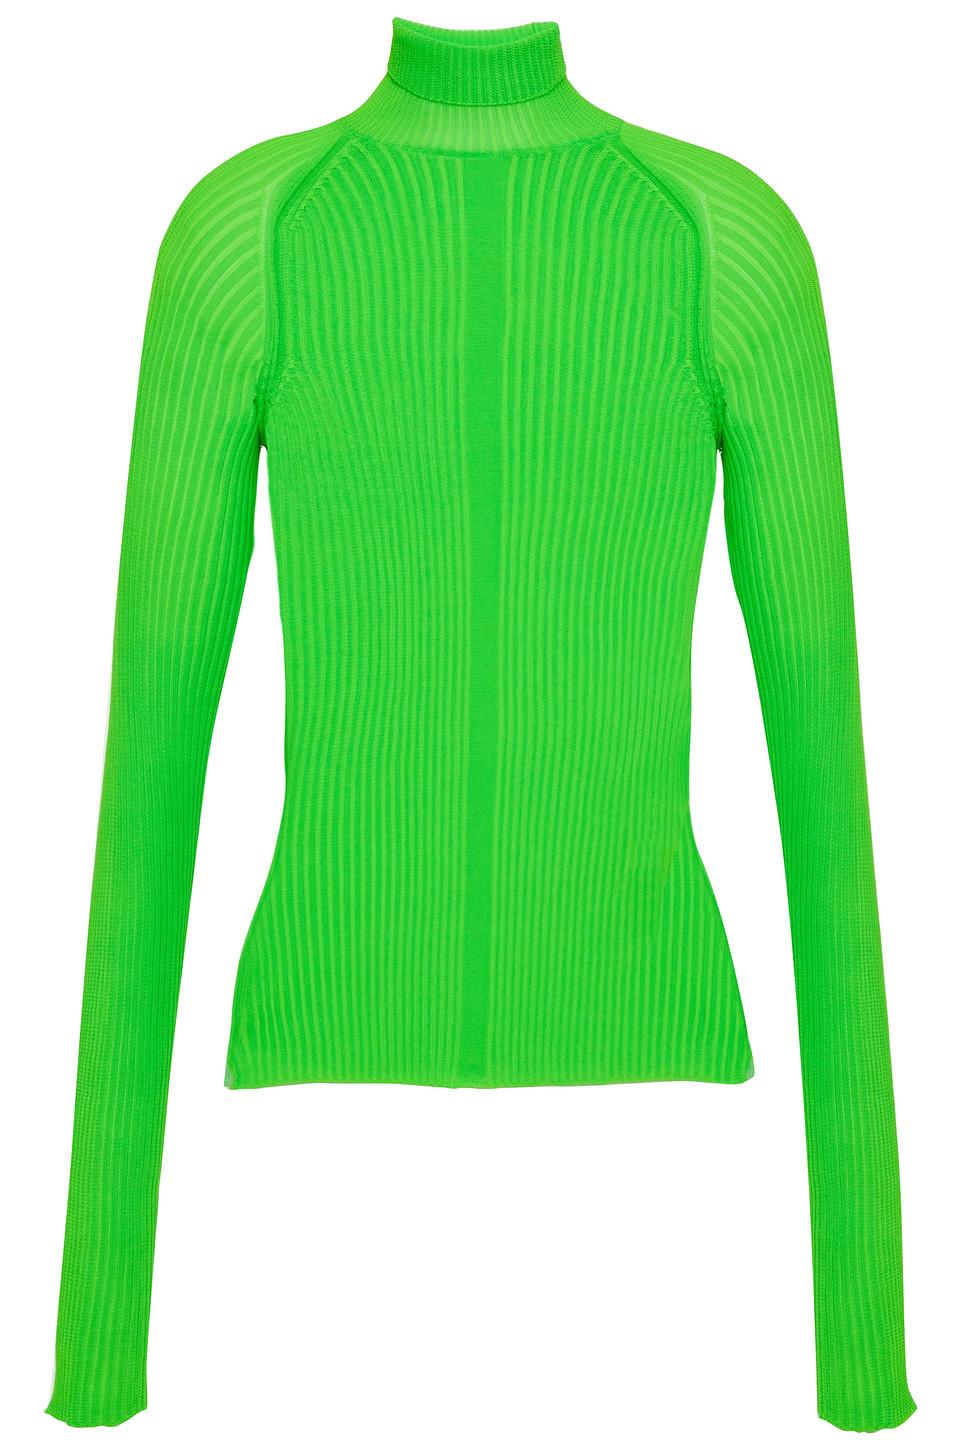 Acne Studios Neon Ribbed-knit Turtleneck Top in Green | Lyst